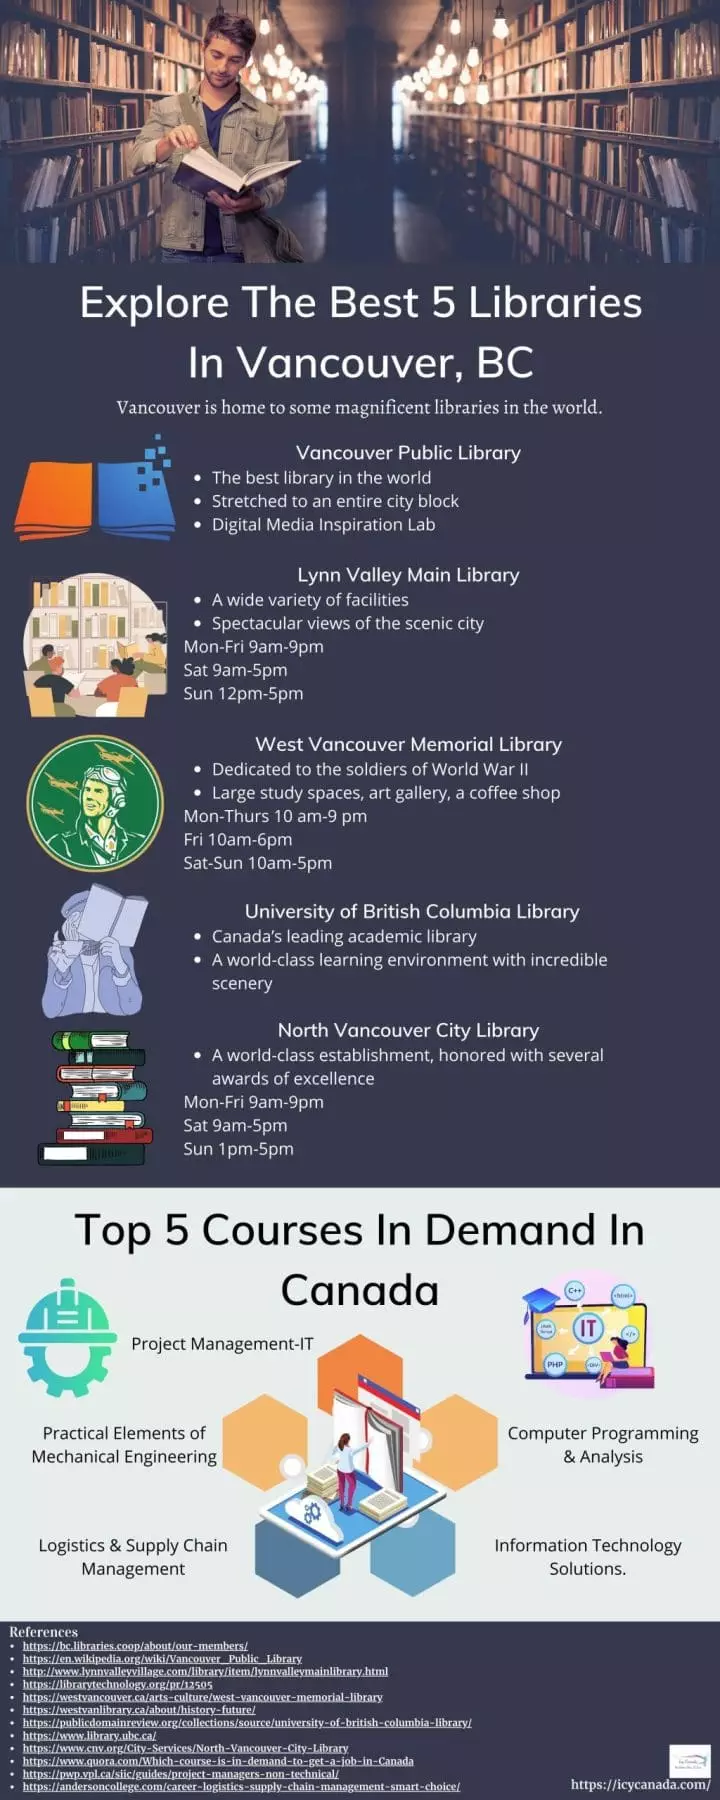 Explore The Best 5 Libraries In Vancouver, BC